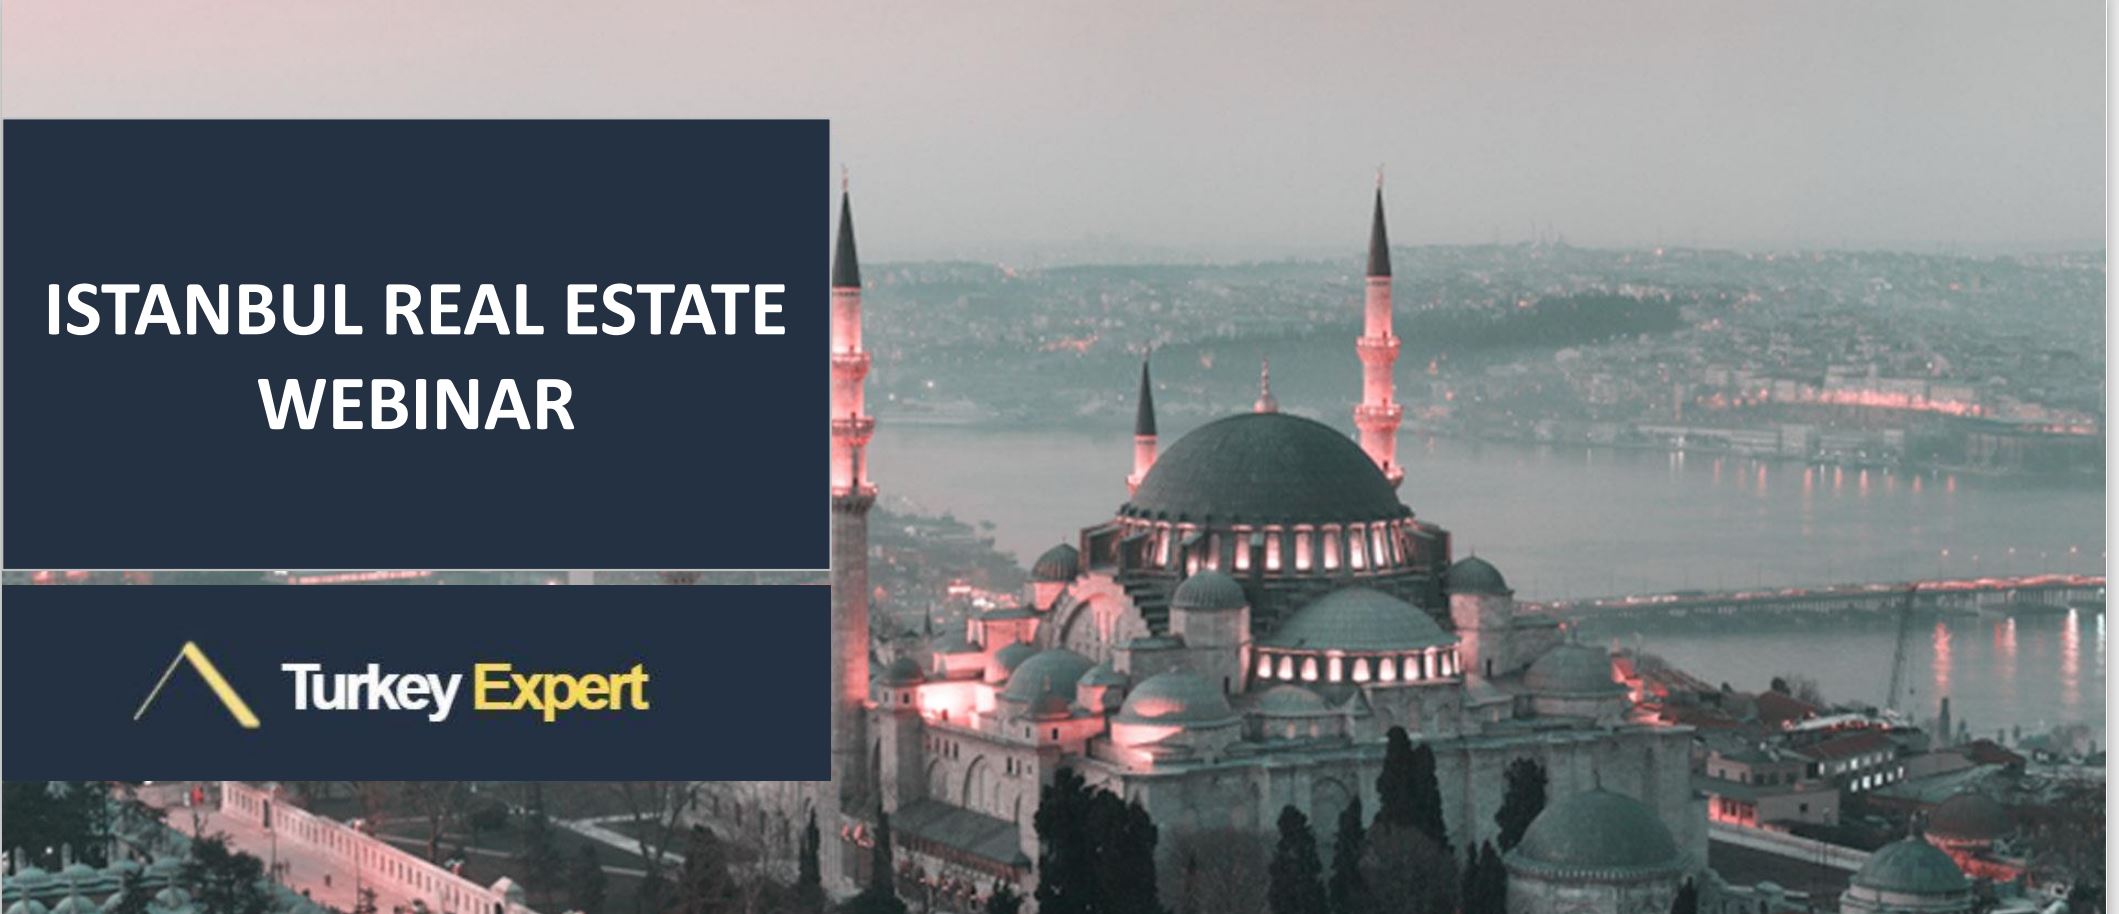 We'll be performaing a live presentation about Istanbul real estate on 9 May 2021